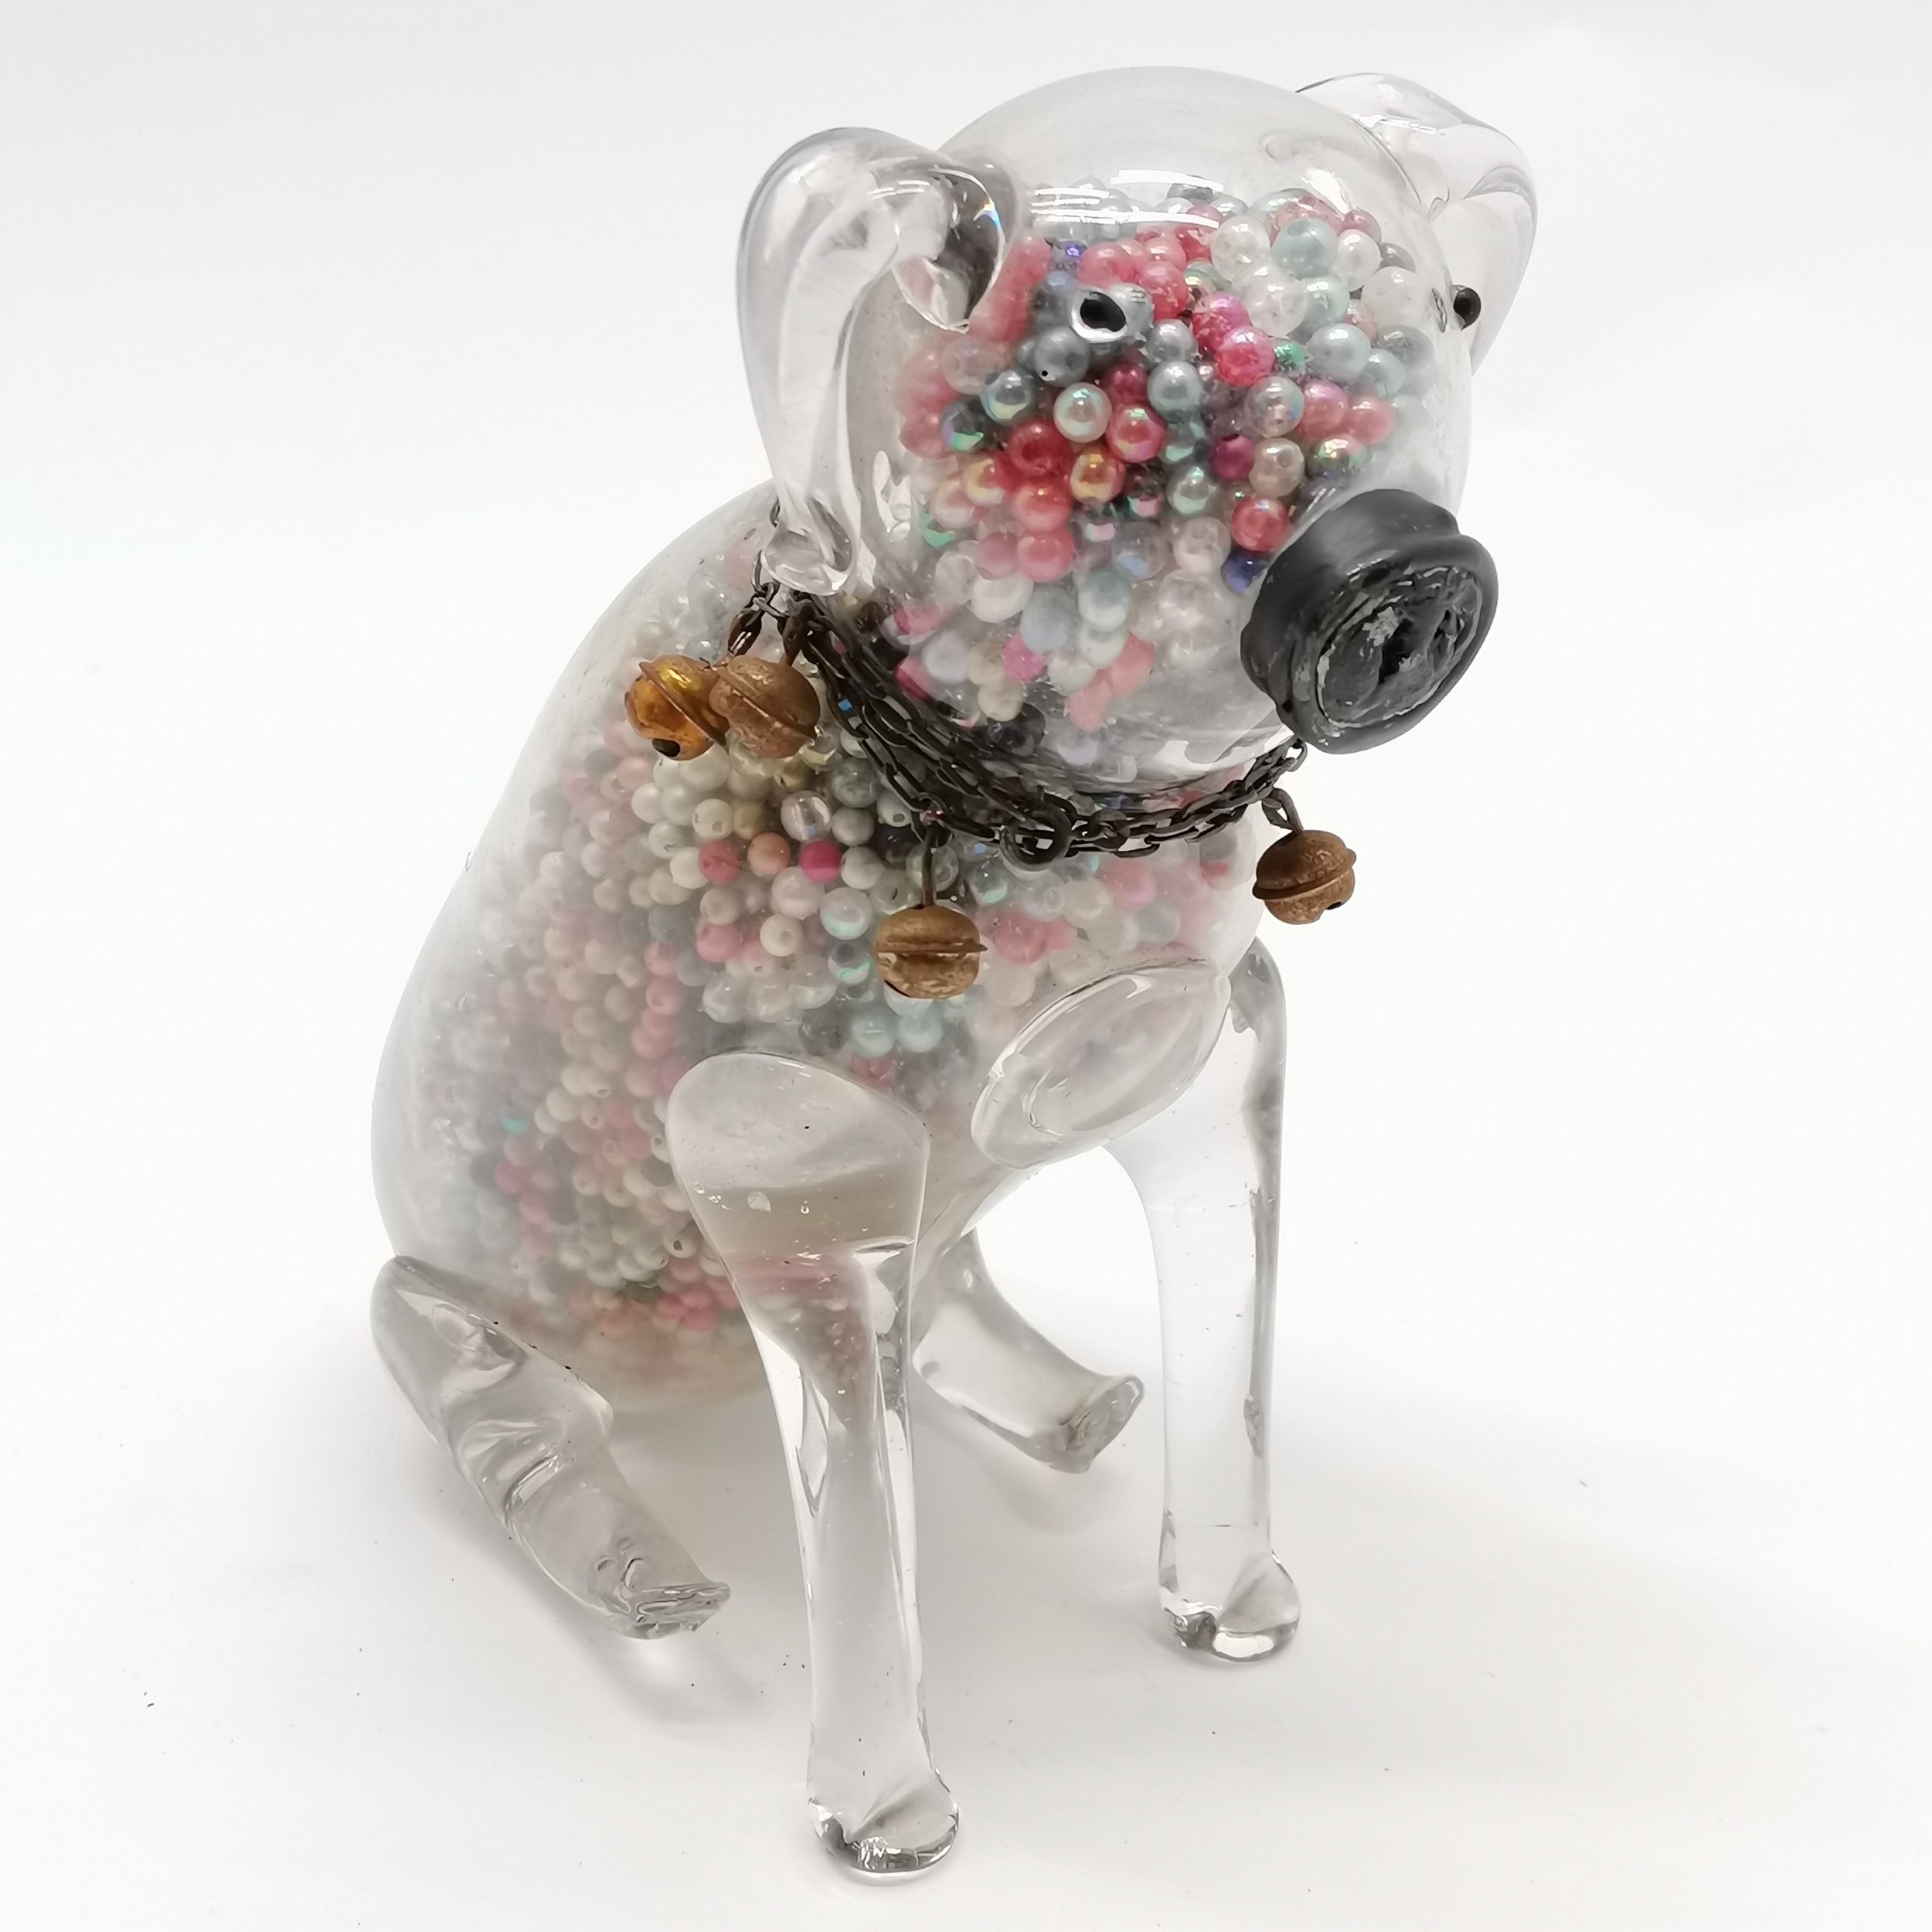 Unusual novelty glass dog figure filled with beads & has a metal chain collar with bells - 18.5cm - Image 2 of 4